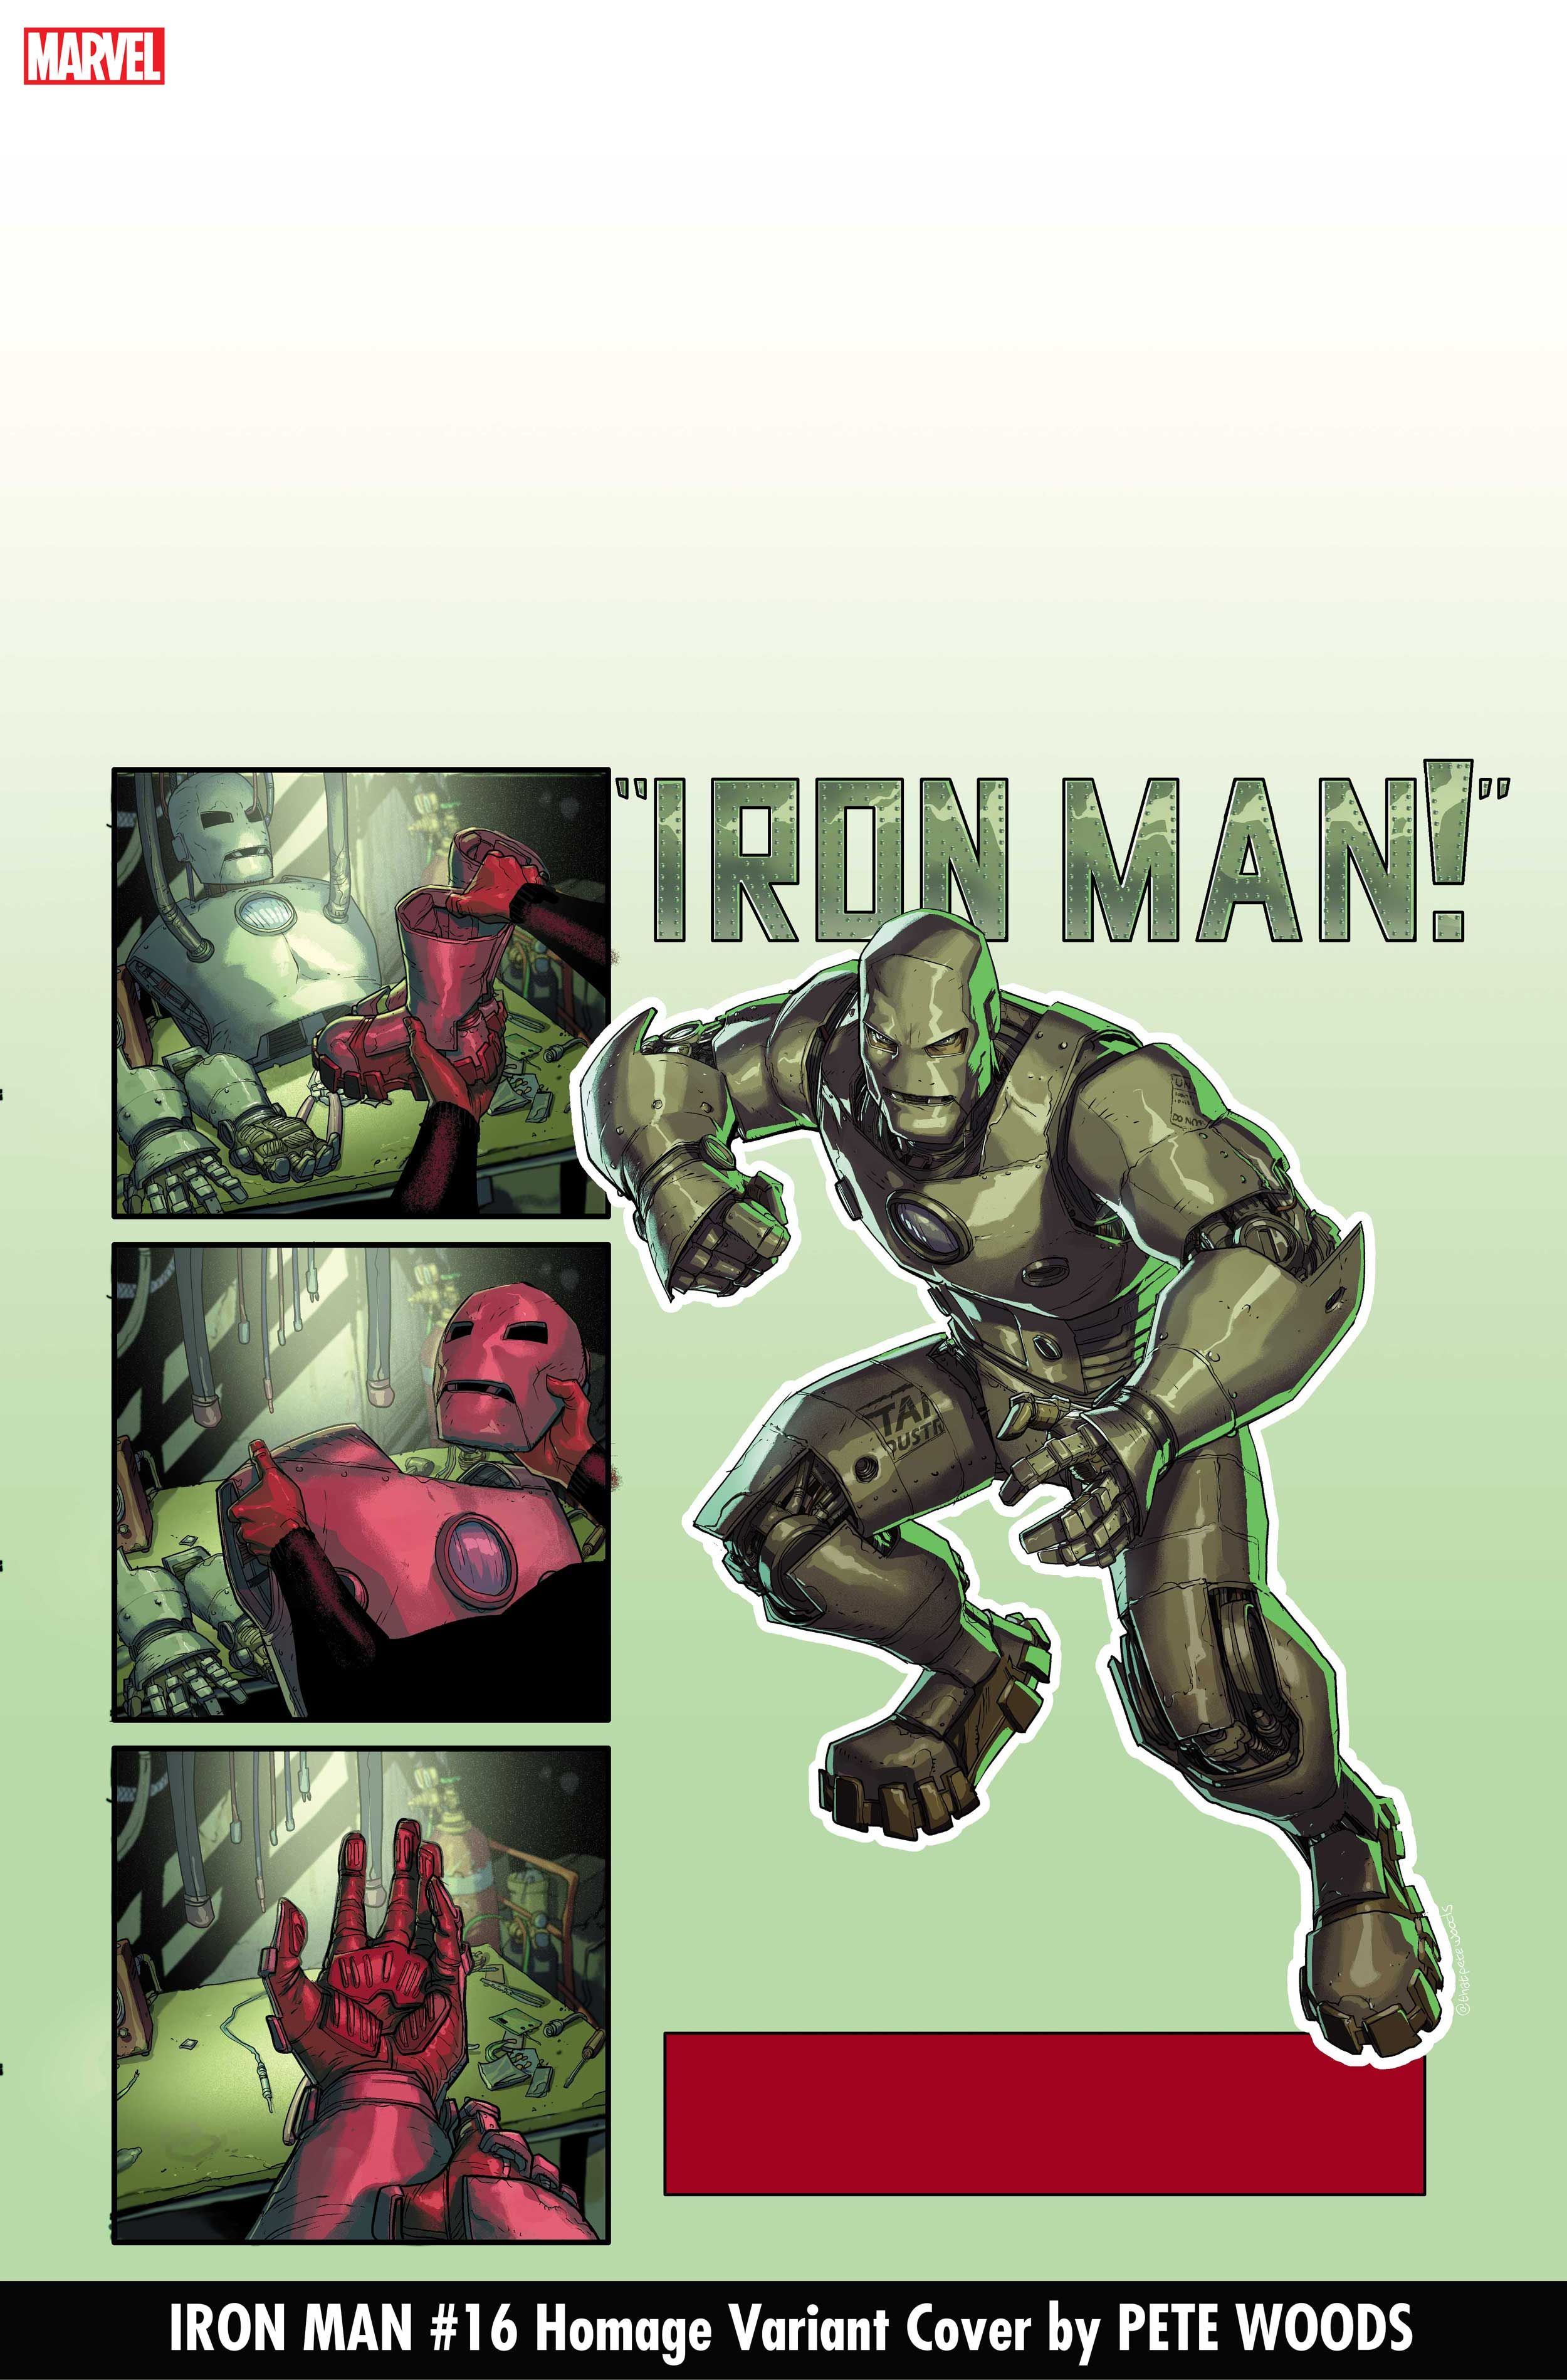 Pete Woods Homage Variant Cover for Iron Man #16